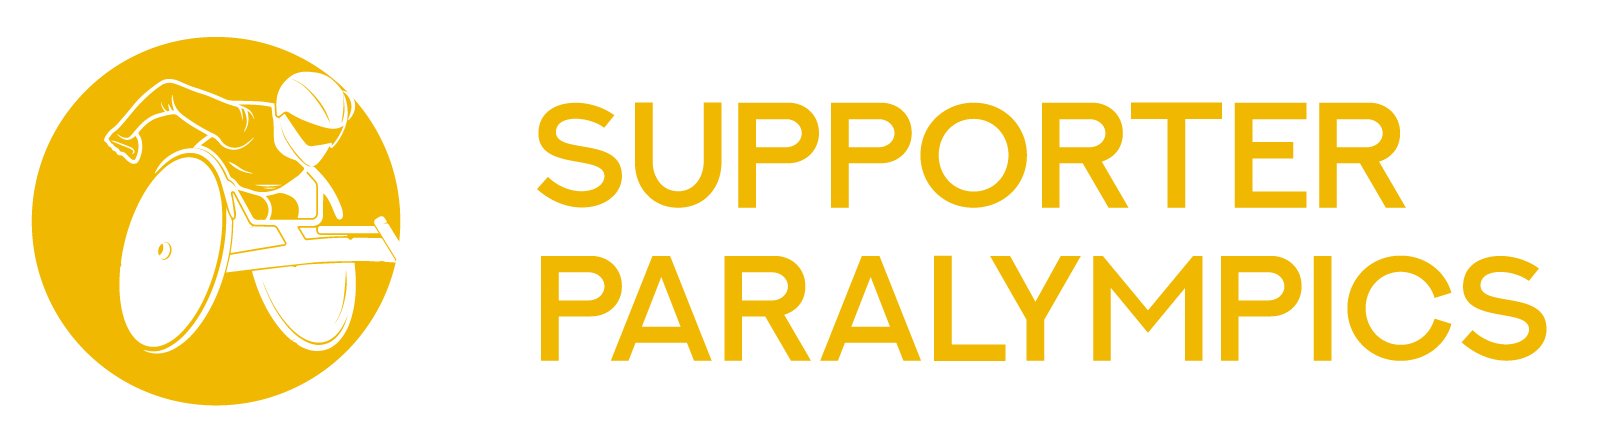 Supporter Paralympics